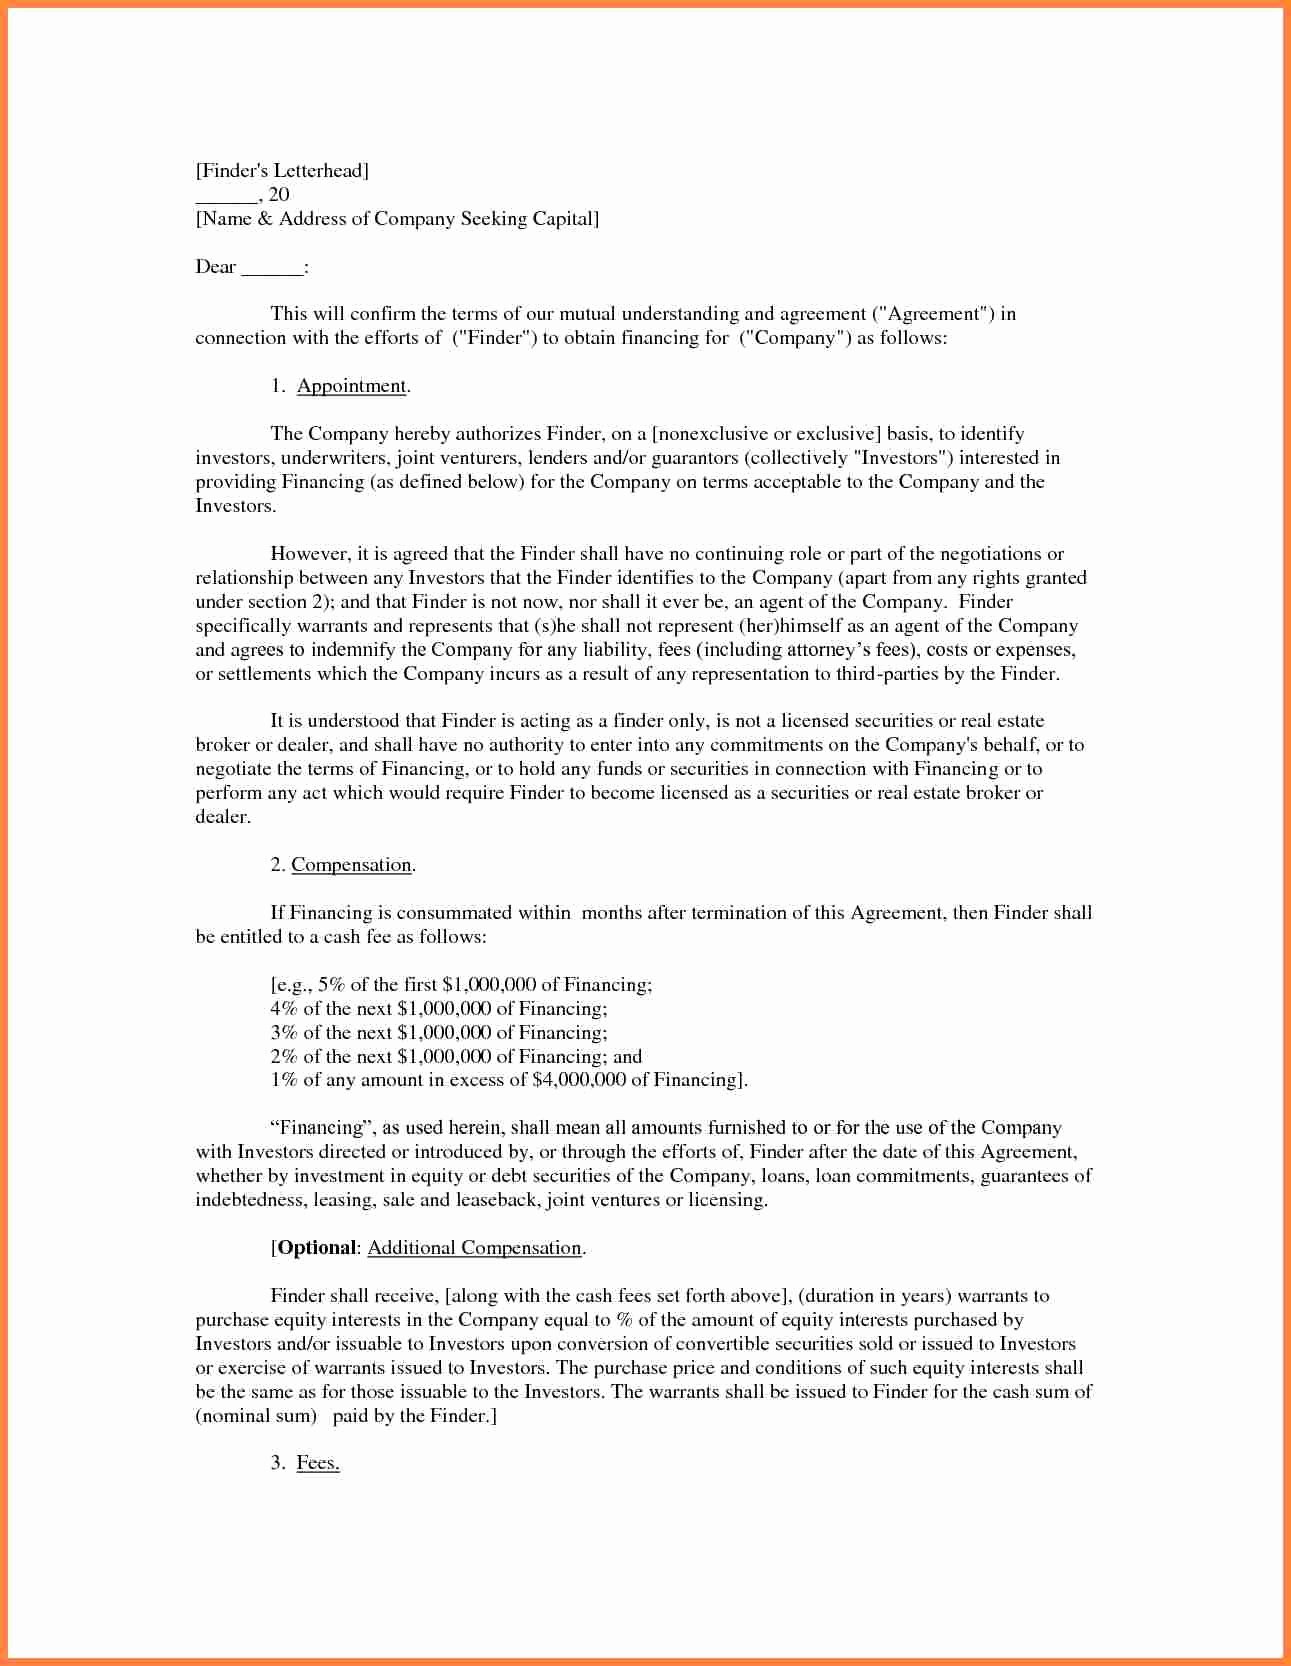 Agreement Template Between Two Parties Lovely 7 Agreement Letter Template Between Two Parties